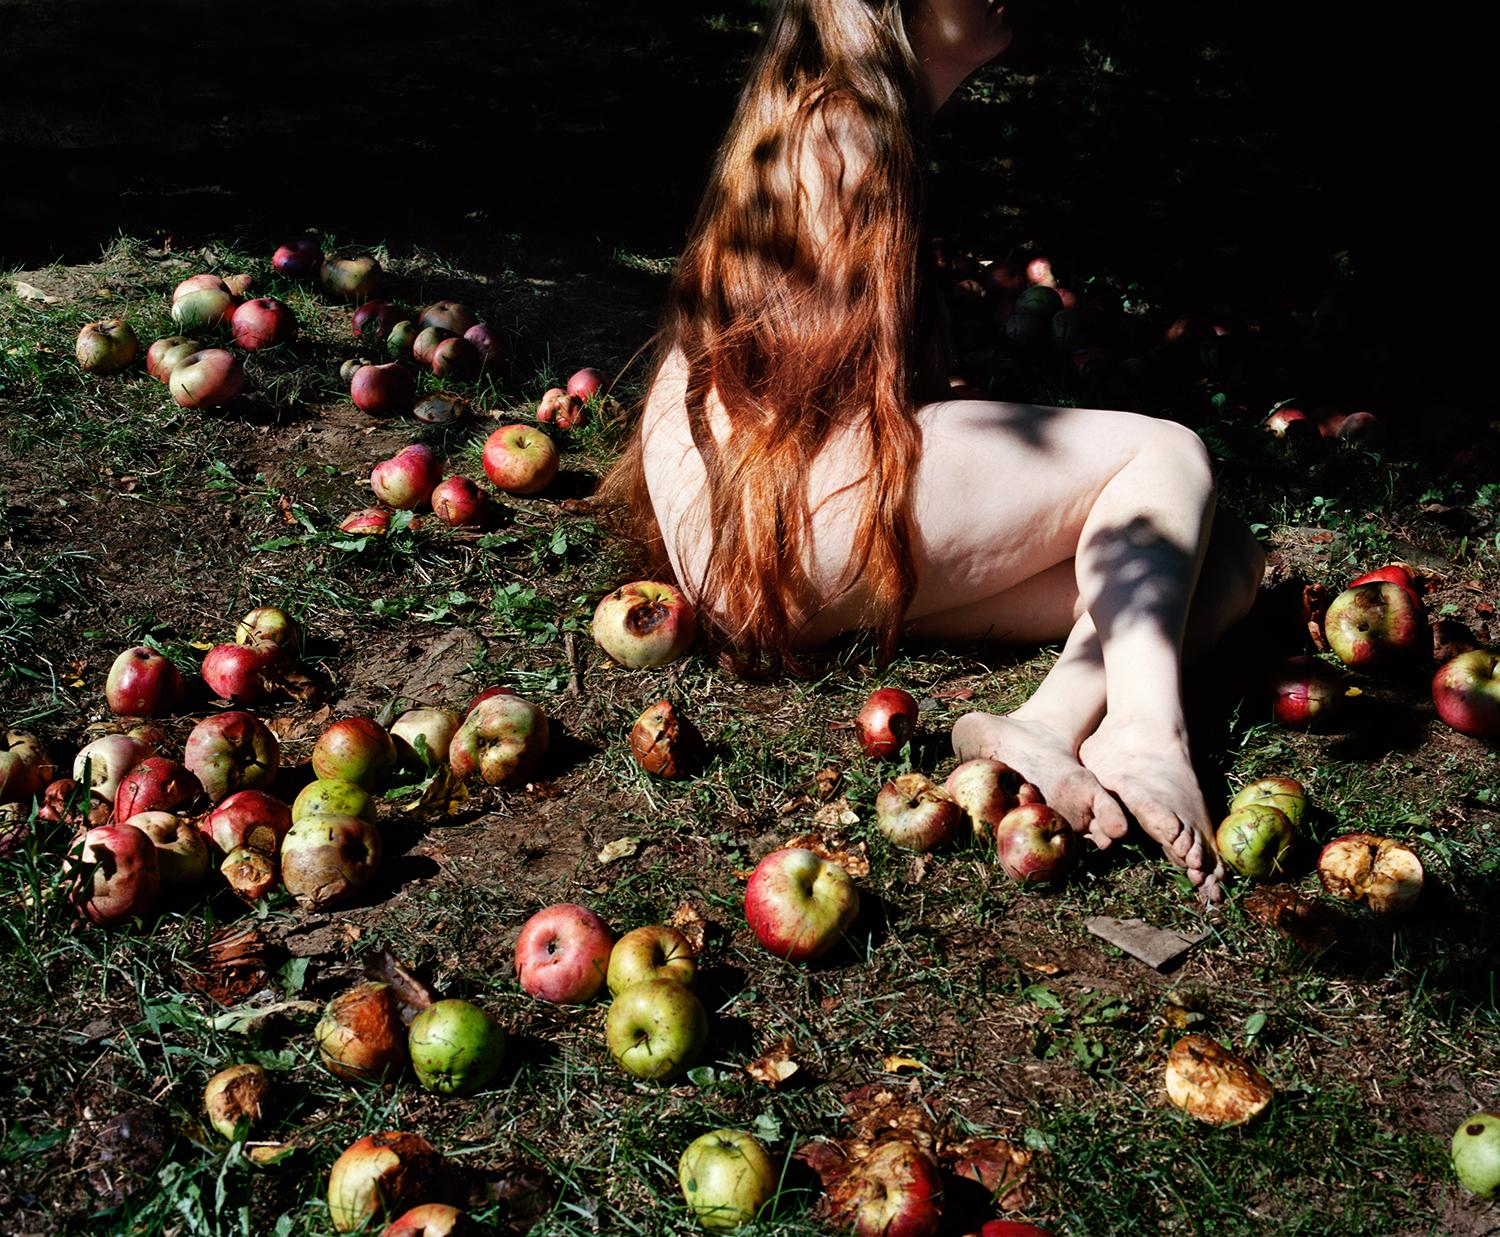 Jenna and Fallen Apples, 2017 - Jocelyn Lee (Colour Photography)
Signed, dated and inscribed with title on reverse
Archival pigment print

Available in two sizes:
23 x 28 inches - edition of 5
30 x 40 inches - edition of 5

Throughout her career,